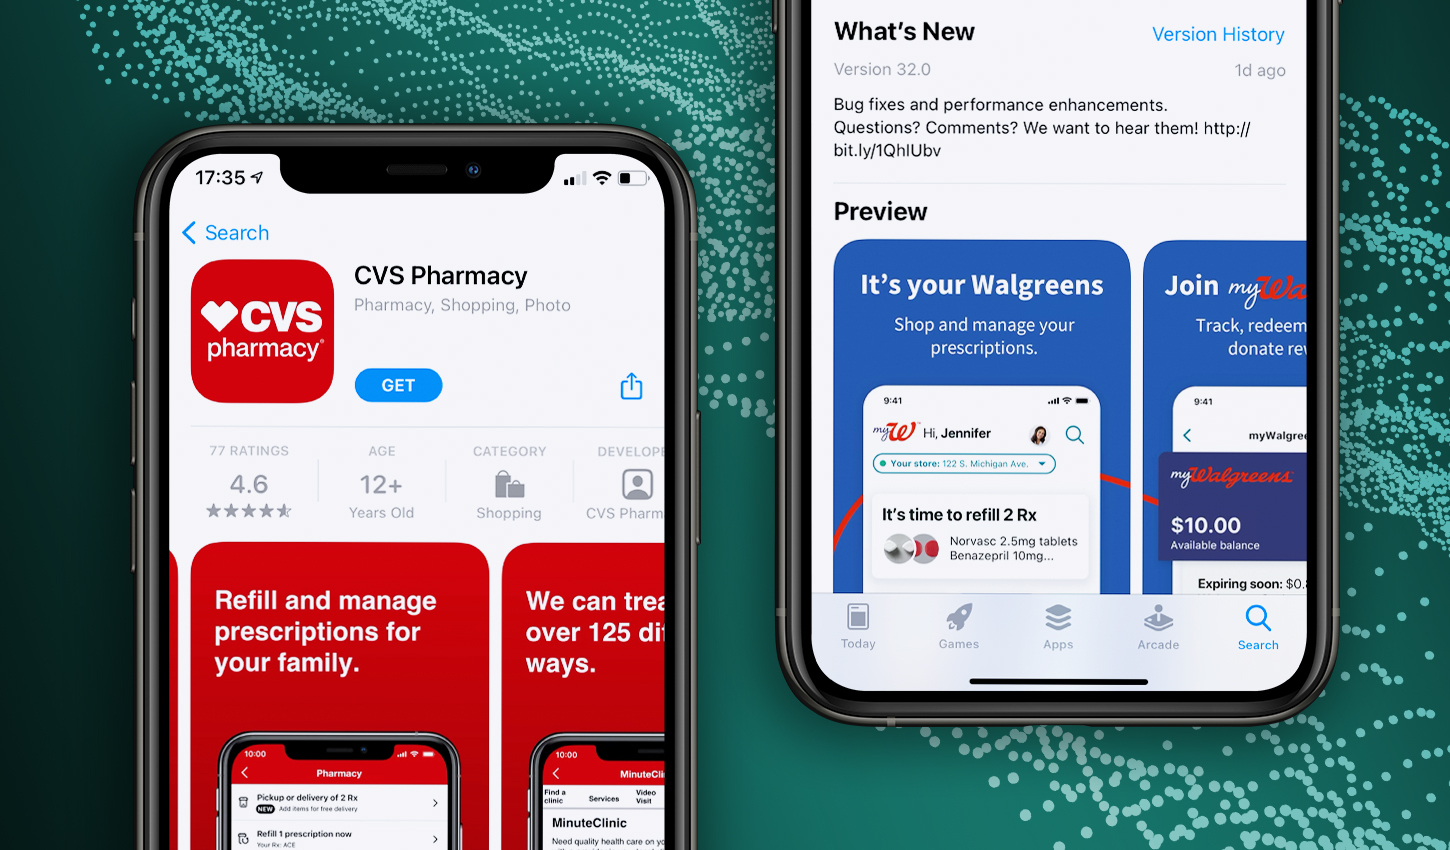 Walgreens, CVS, and Rite Aid reached 856,000 installs in the first two weeks of February, up 51 percent from the previous two weeks